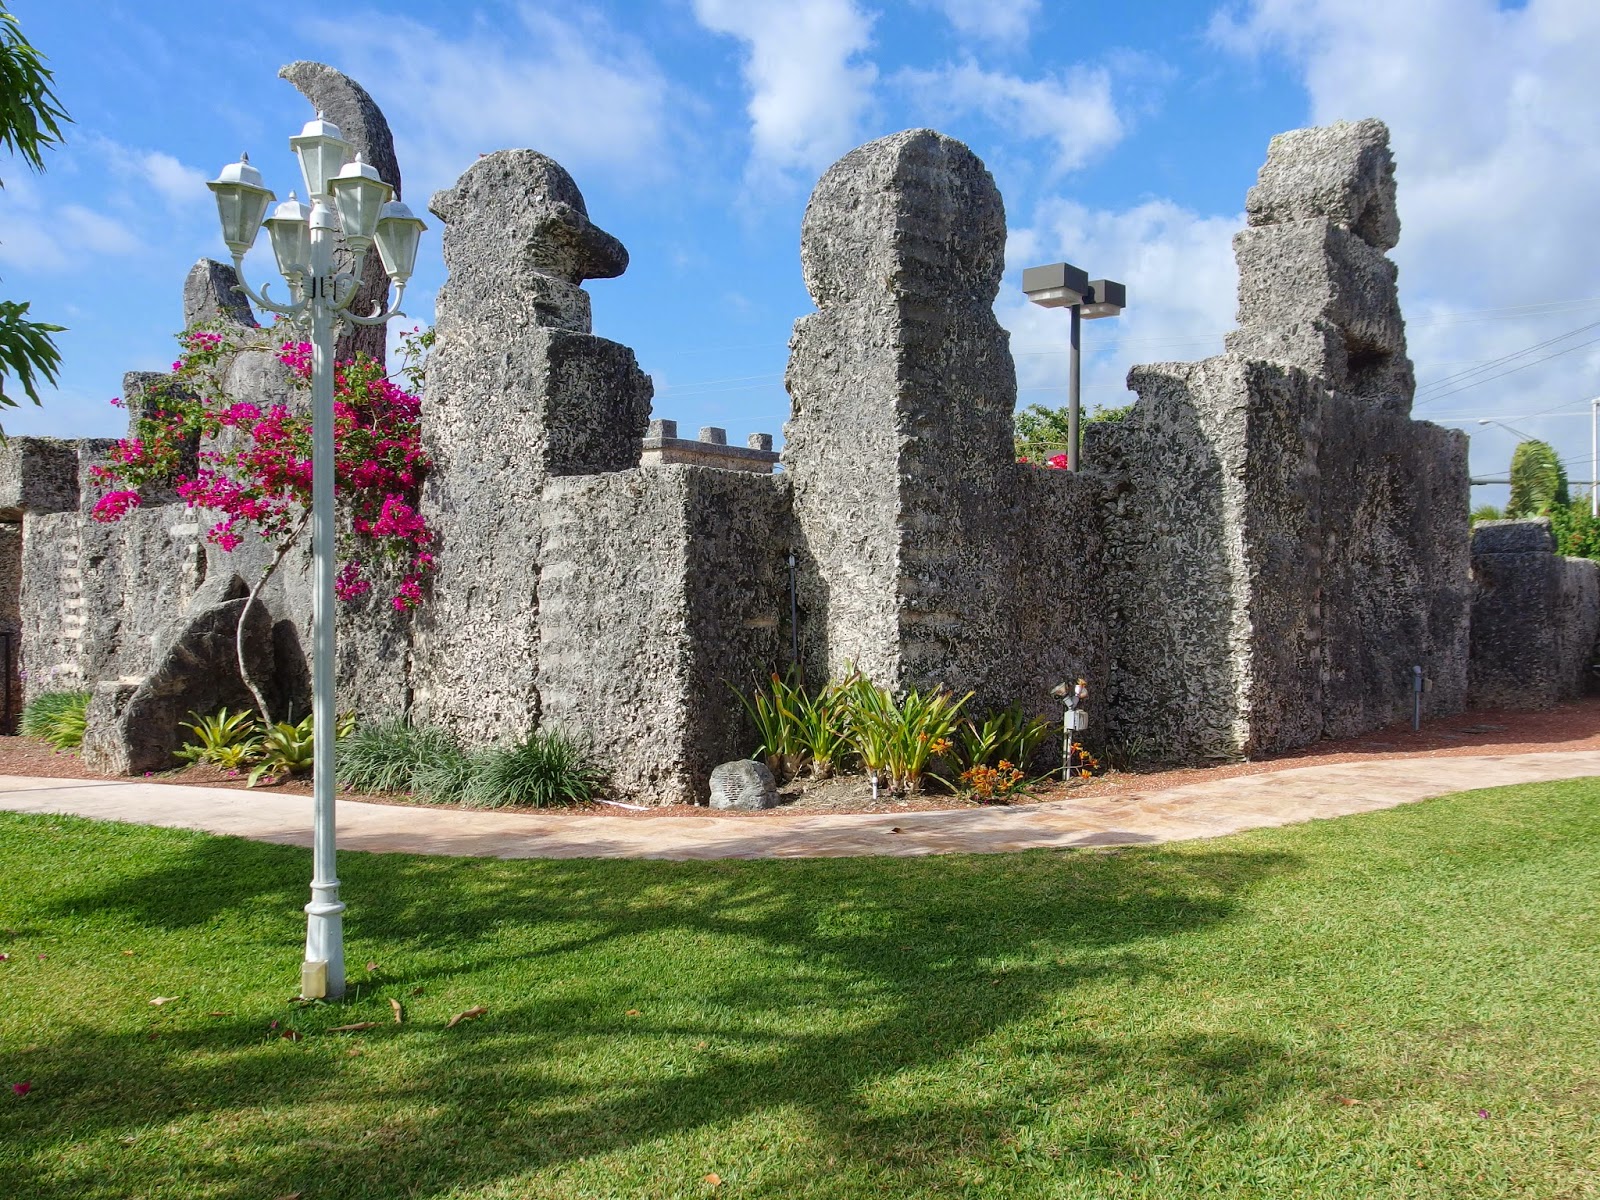 coral castle fun things to do visiting miami fl